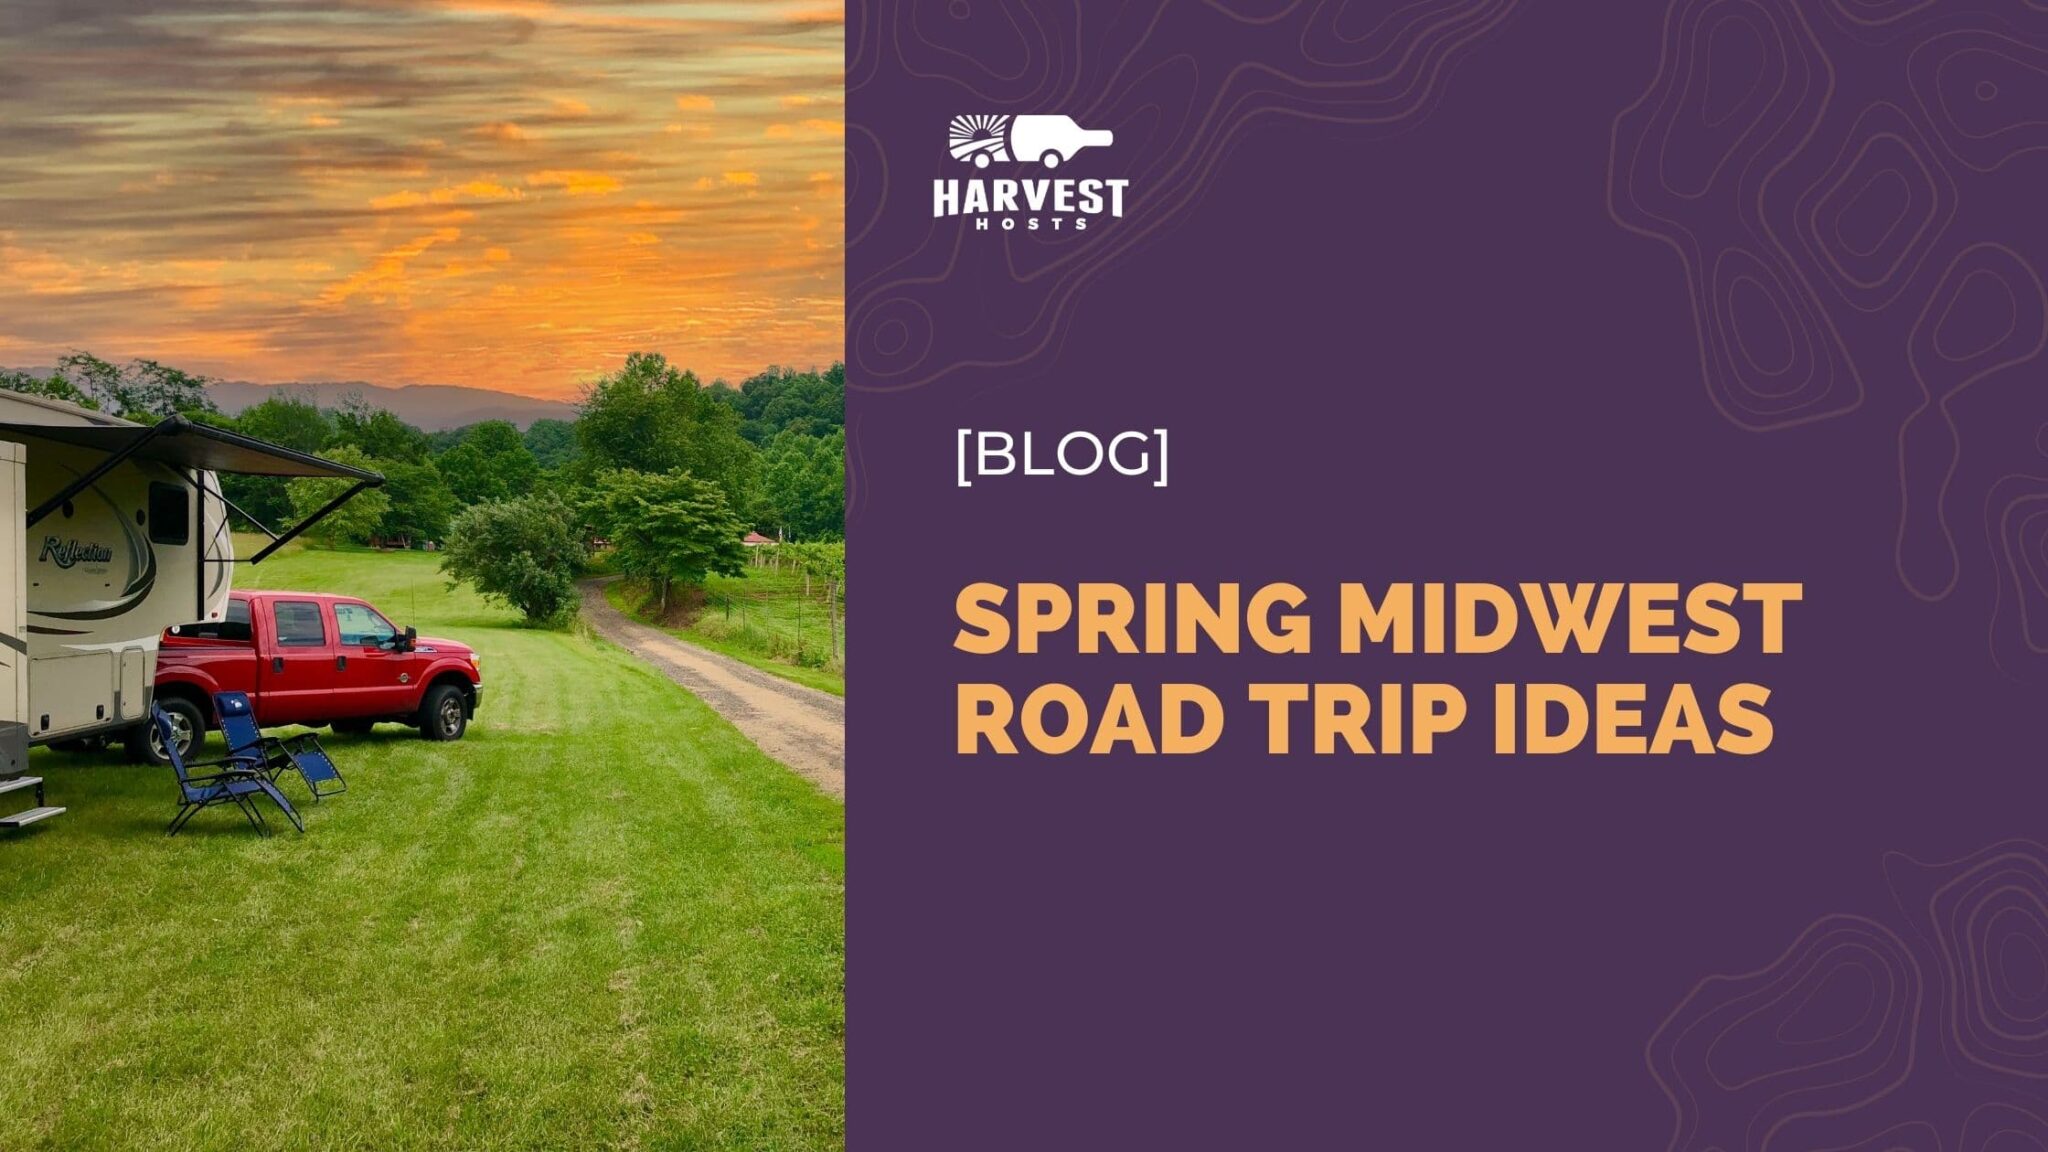 Spring Midwest Road Trip Ideas